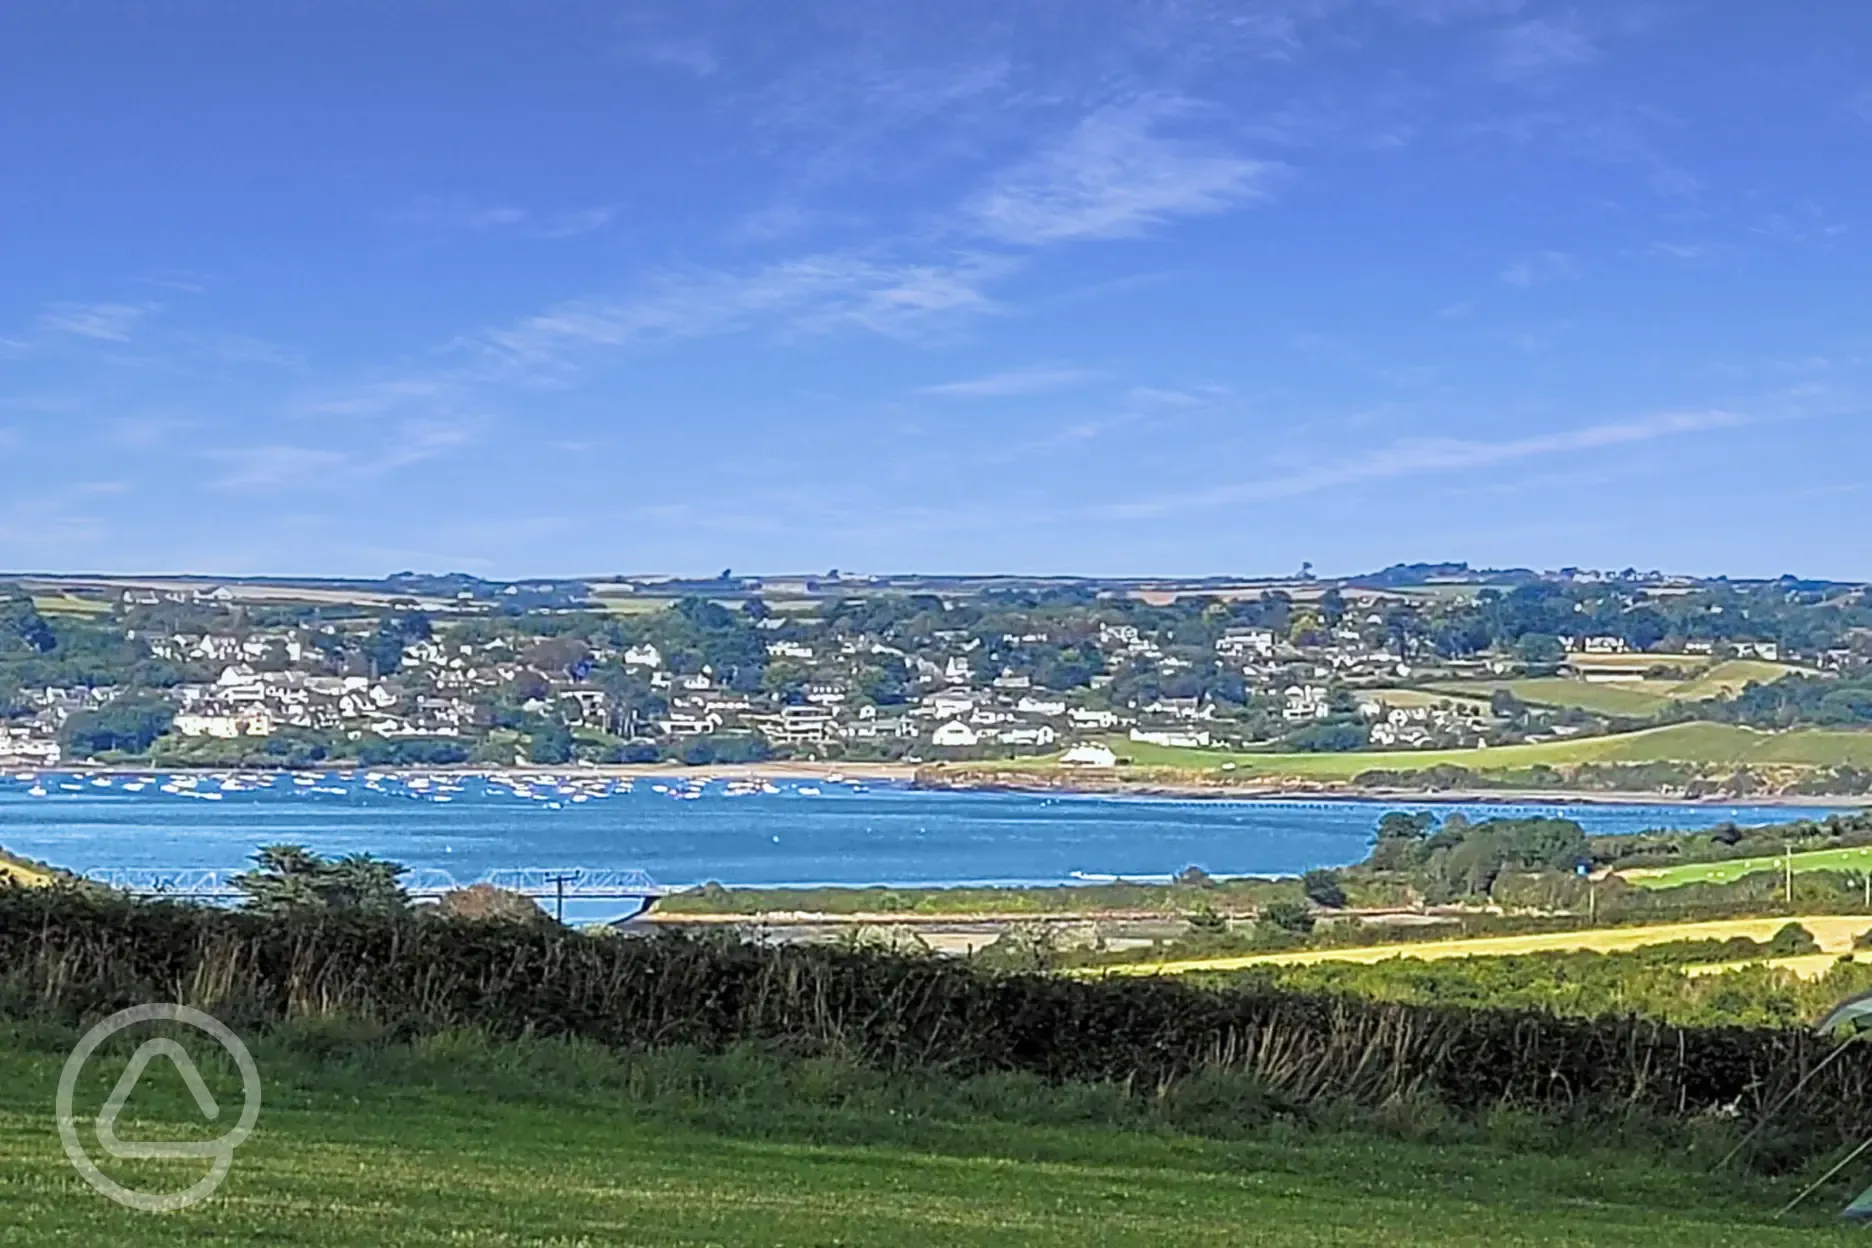 Views of Padstow and the coast